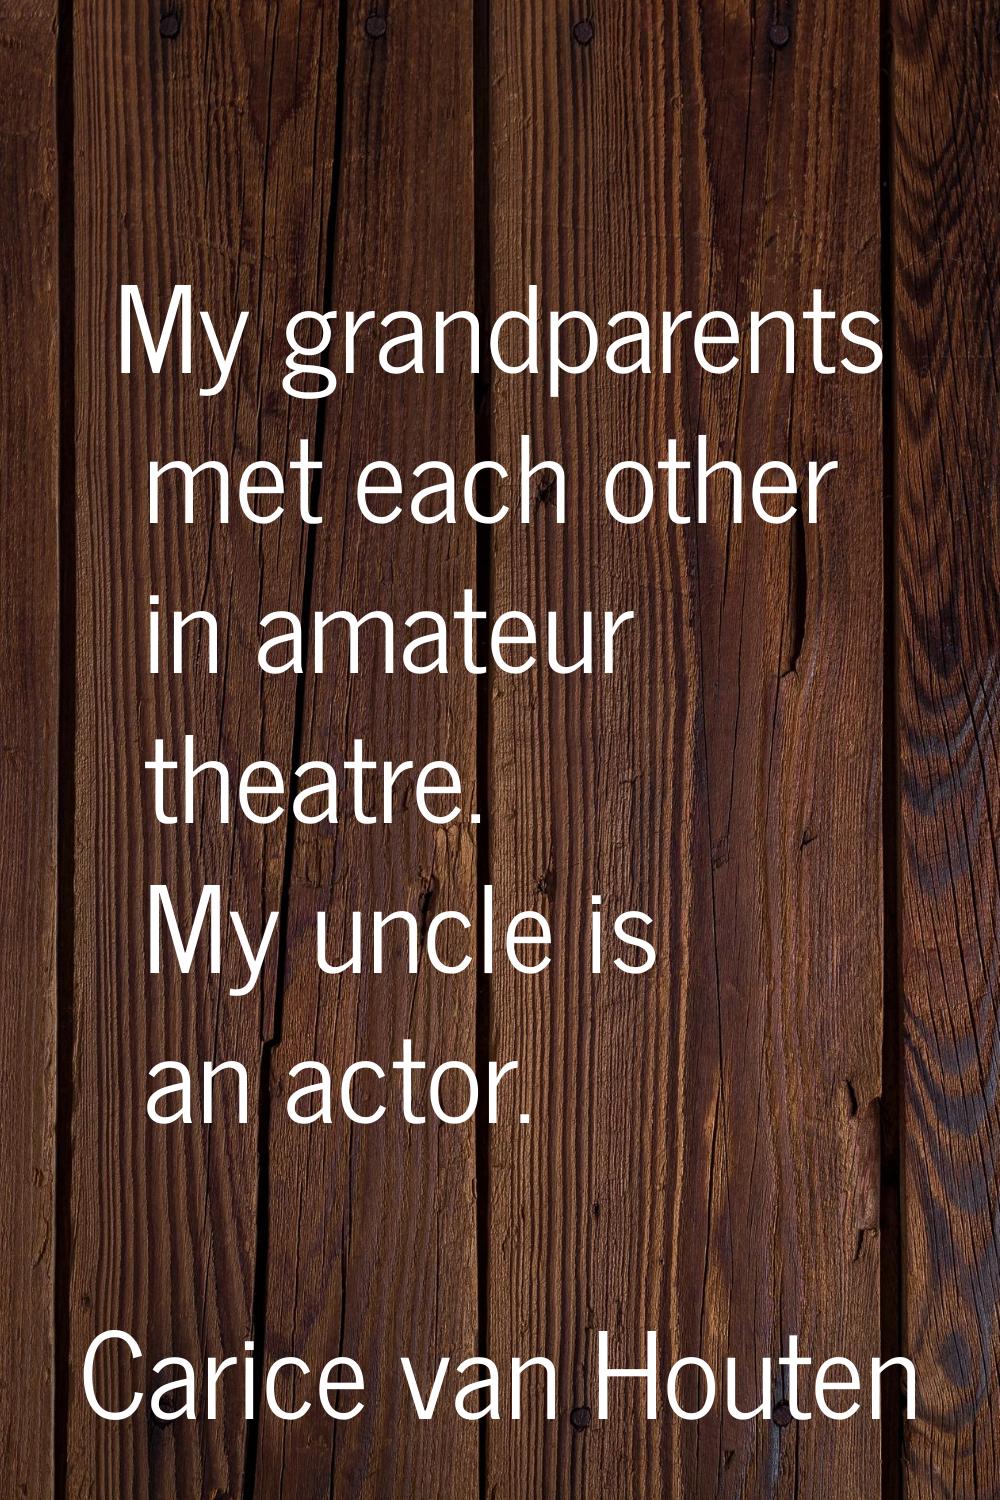 My grandparents met each other in amateur theatre. My uncle is an actor.